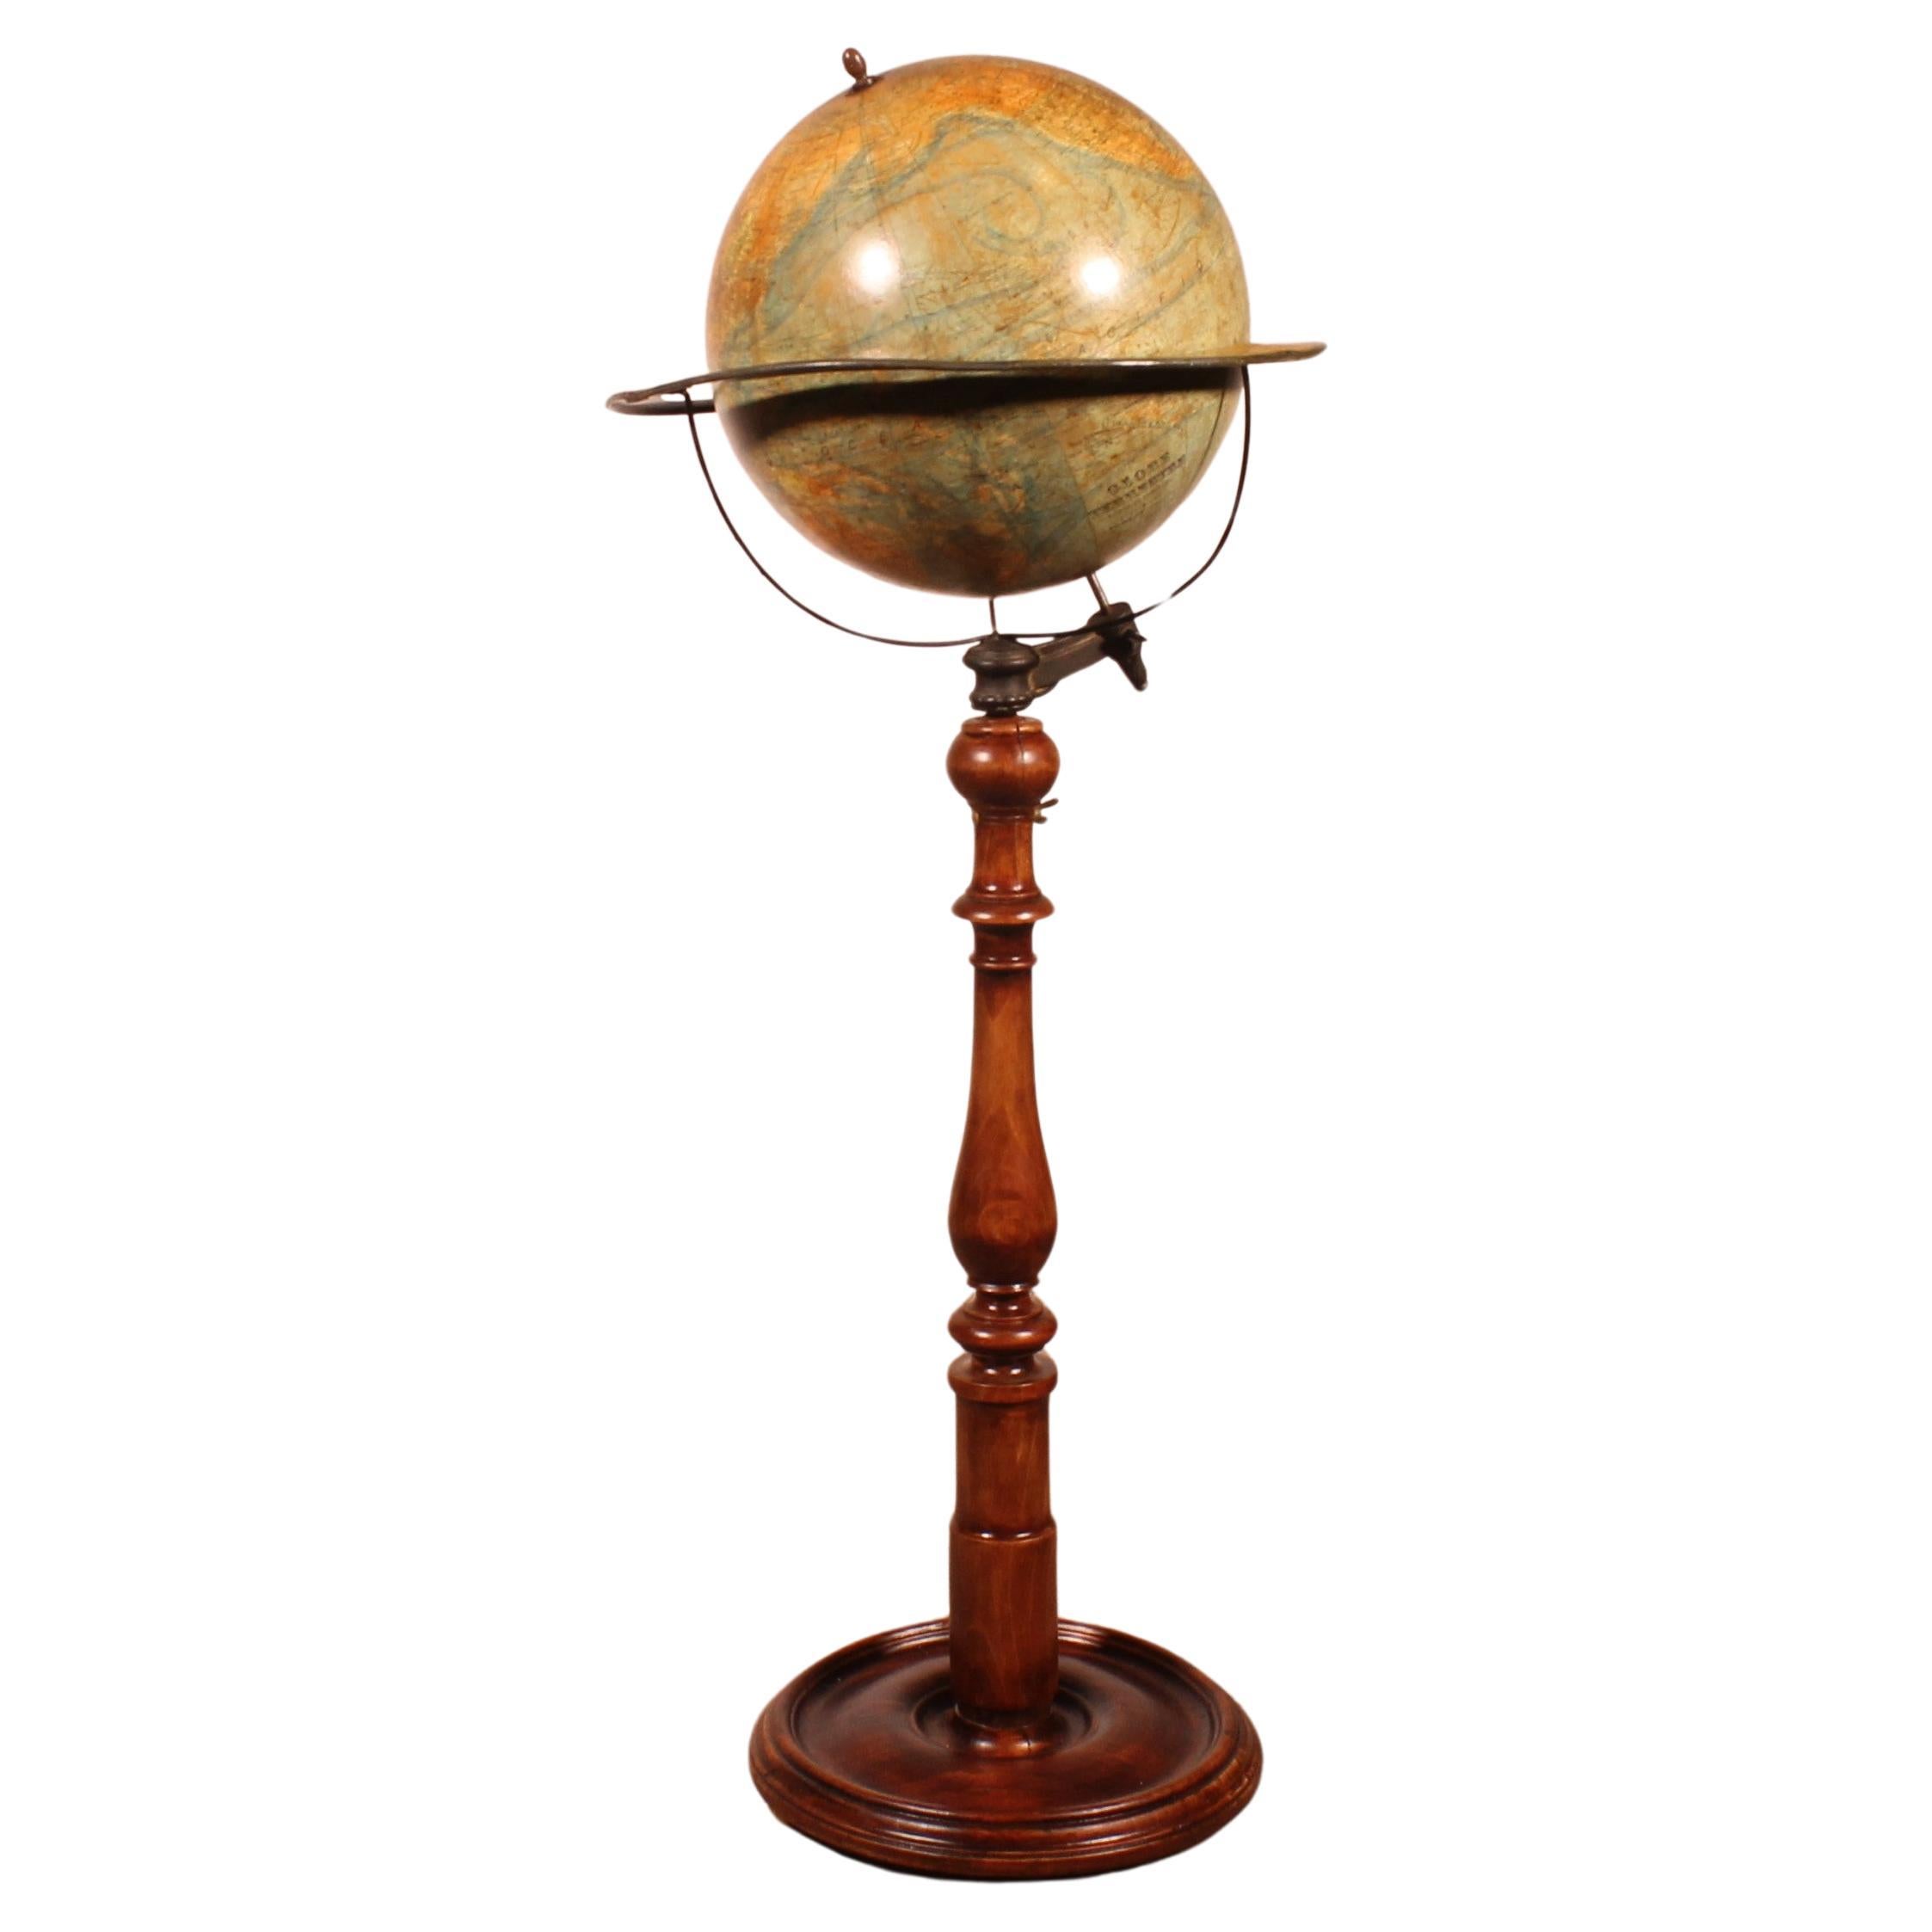 The Library Terrestrial Globe on Stand From J. Forest Paris From The 19th Century